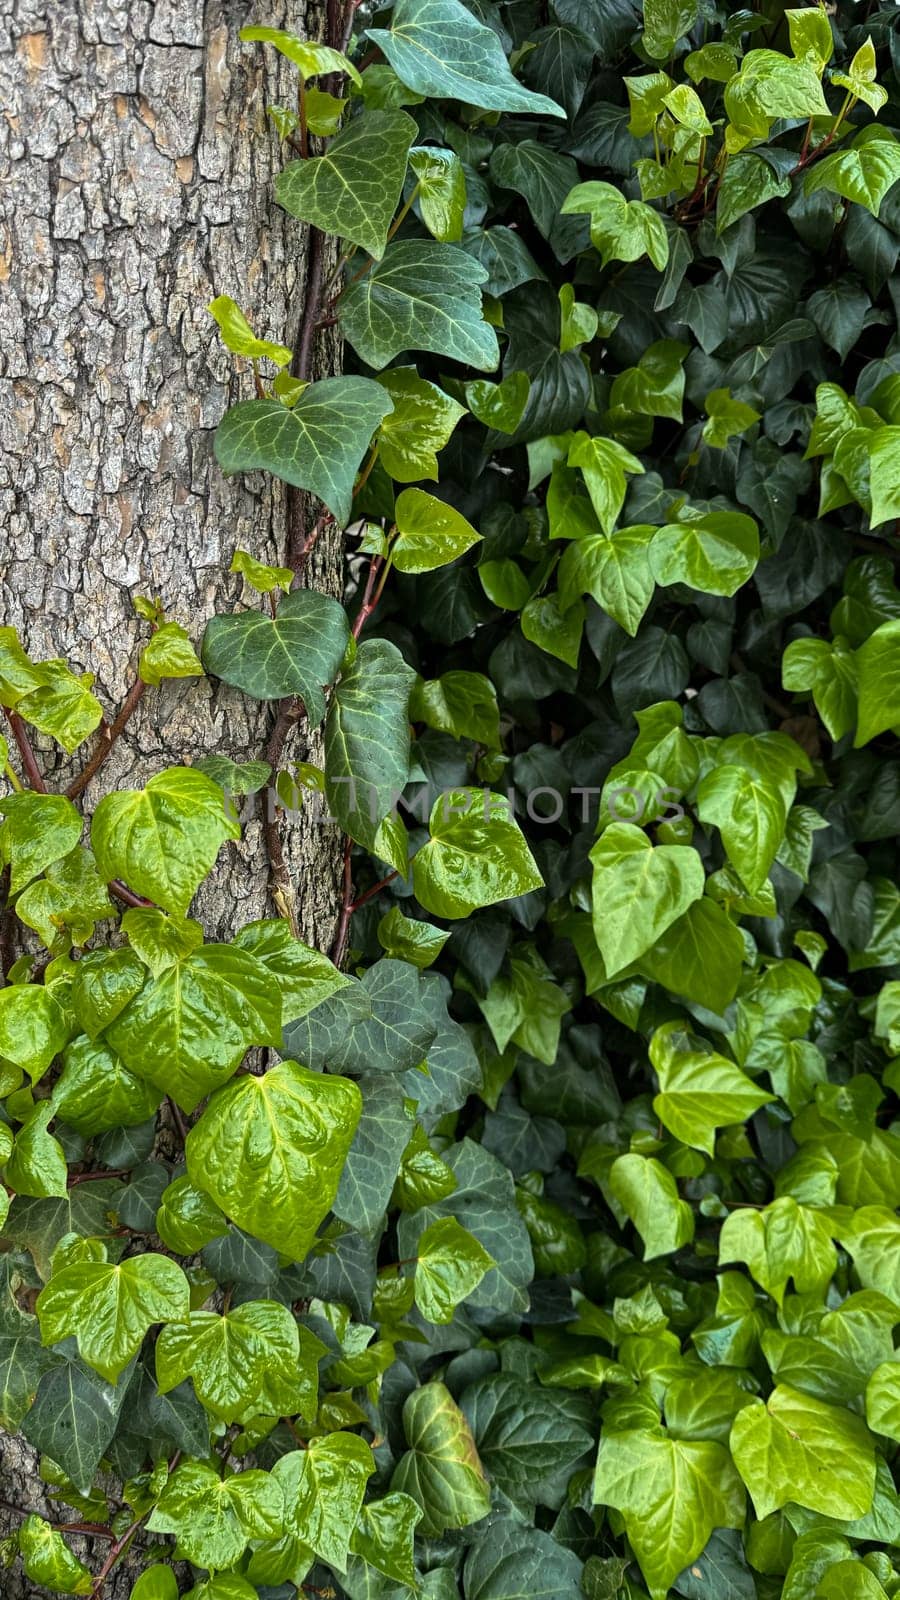 Vivid green ivy leaves climbing on a rough tree bark. Variegated foliage, natural background, horticulture concept for design, banner, wallpaper. High quality photo